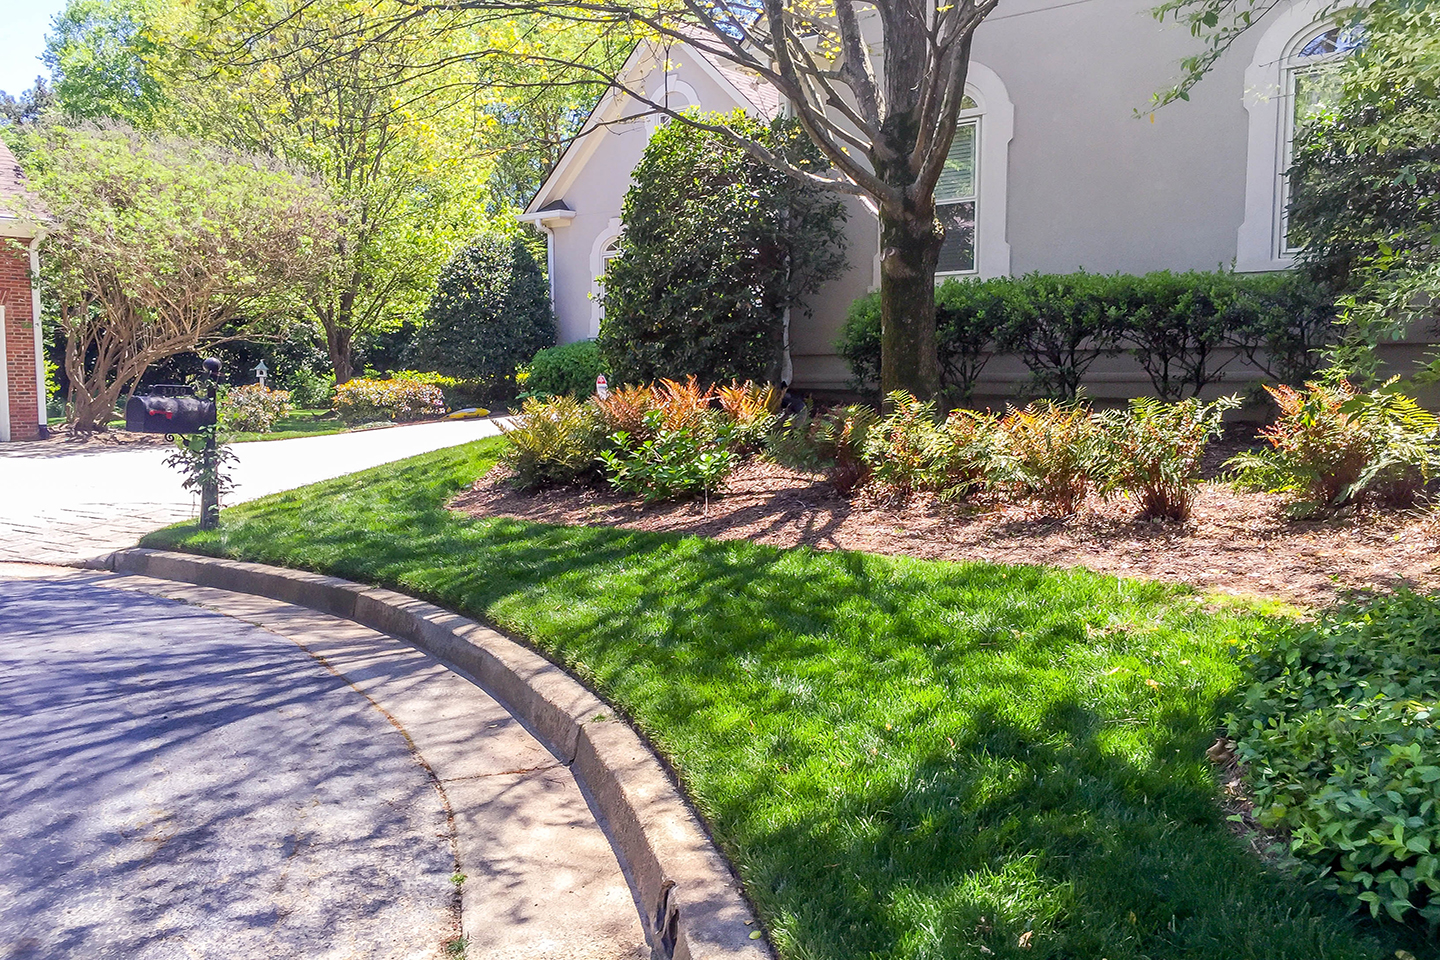 The Ultimate Budget Landscaping Ideas, Landscaping On A Budget